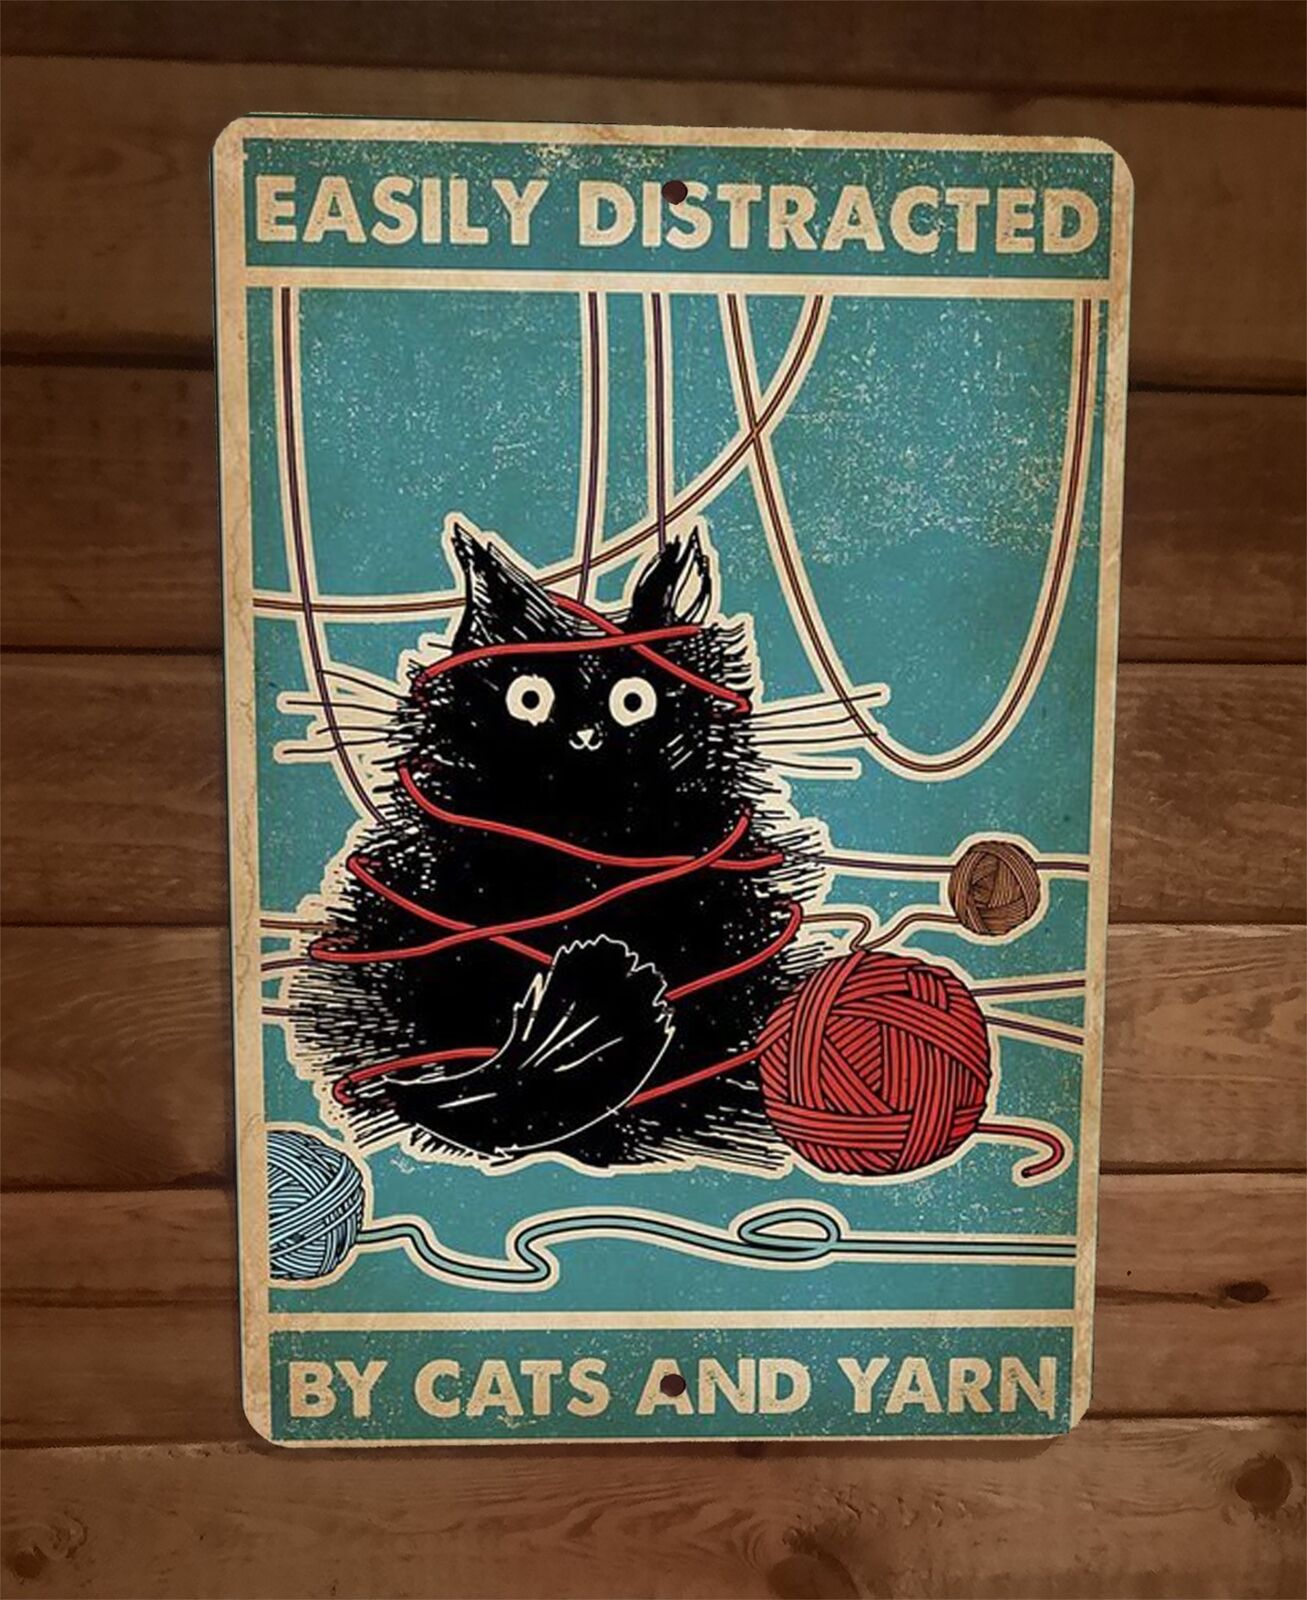 Easily Distracted by Cats and Yarn 8x12 Metal Wall Animal Sign